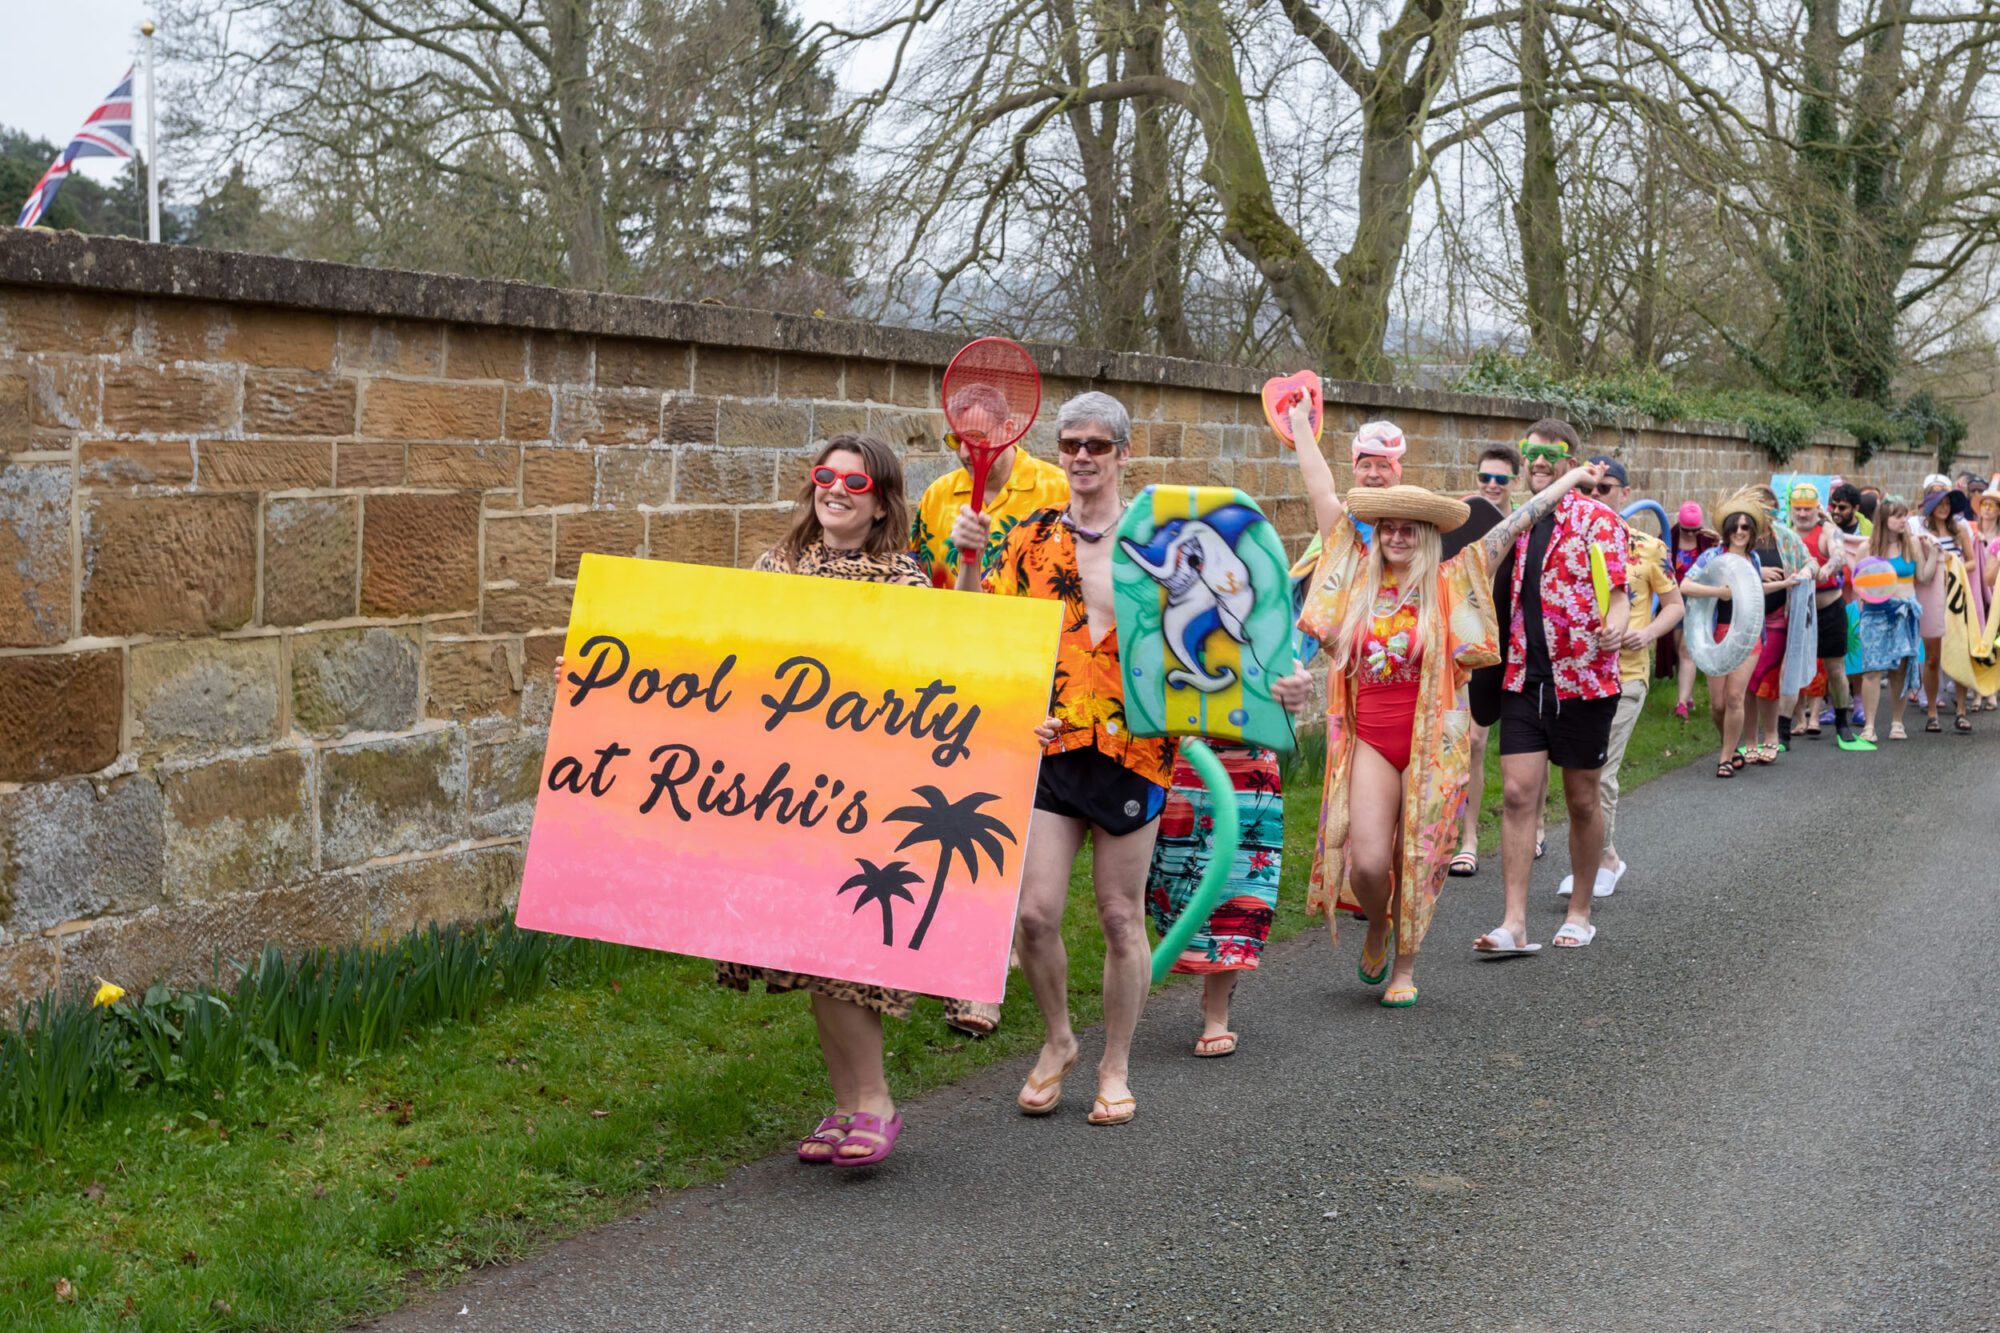 Against a brown wall, grey sky with leafless trees, a row of people in very colourful costumes, including flip flops and goggles and pool toys. A sunset-coloured banner reads in tropical-themed writing "Pool Party at Rishi's" with two palm tree motifs